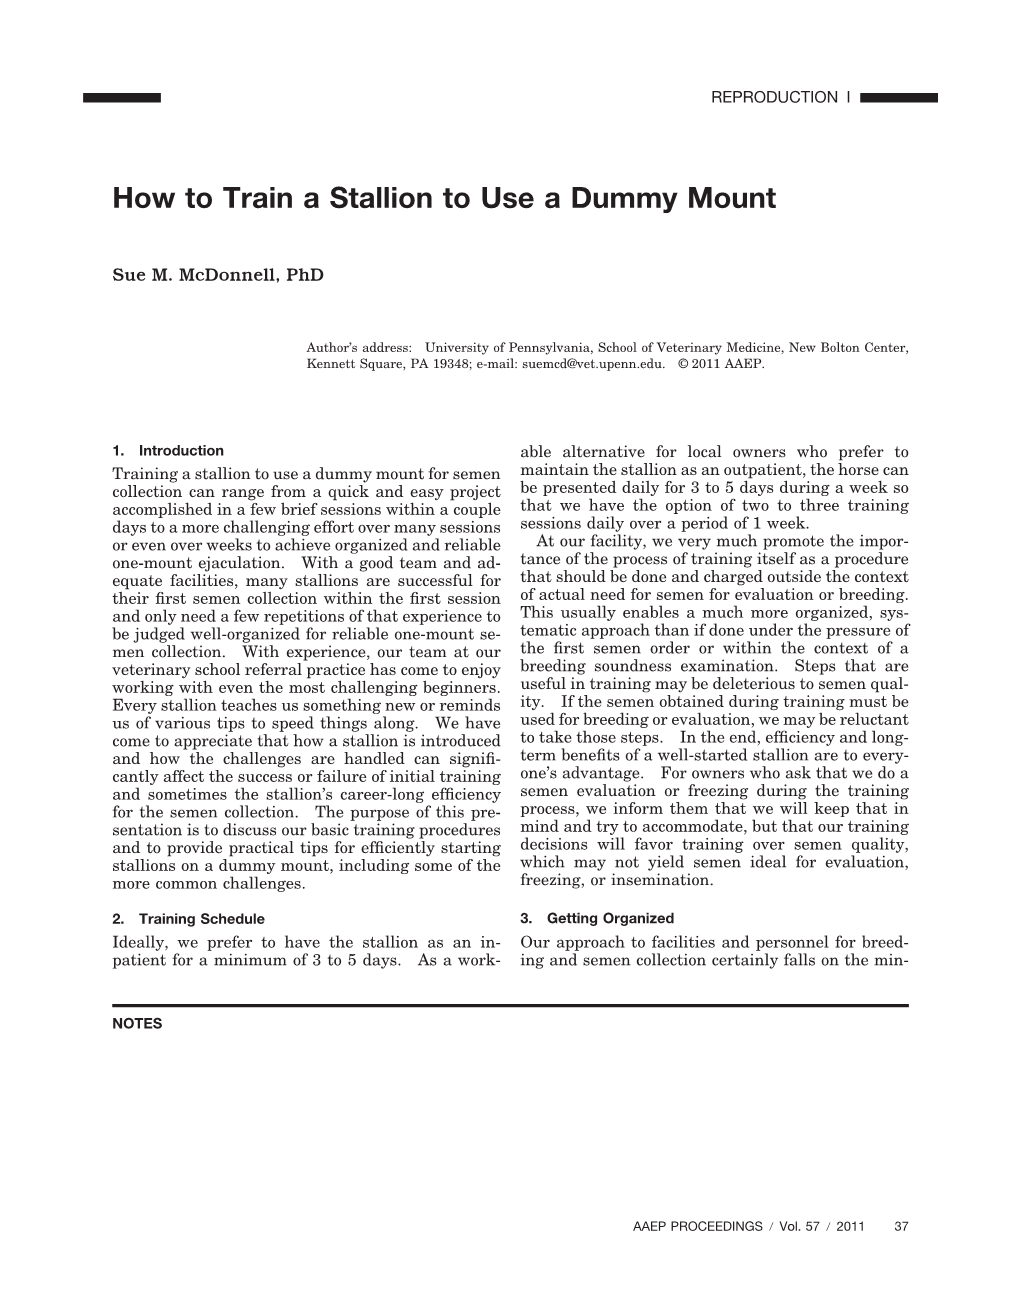 How to Train a Stallion to Use a Dummy Mount